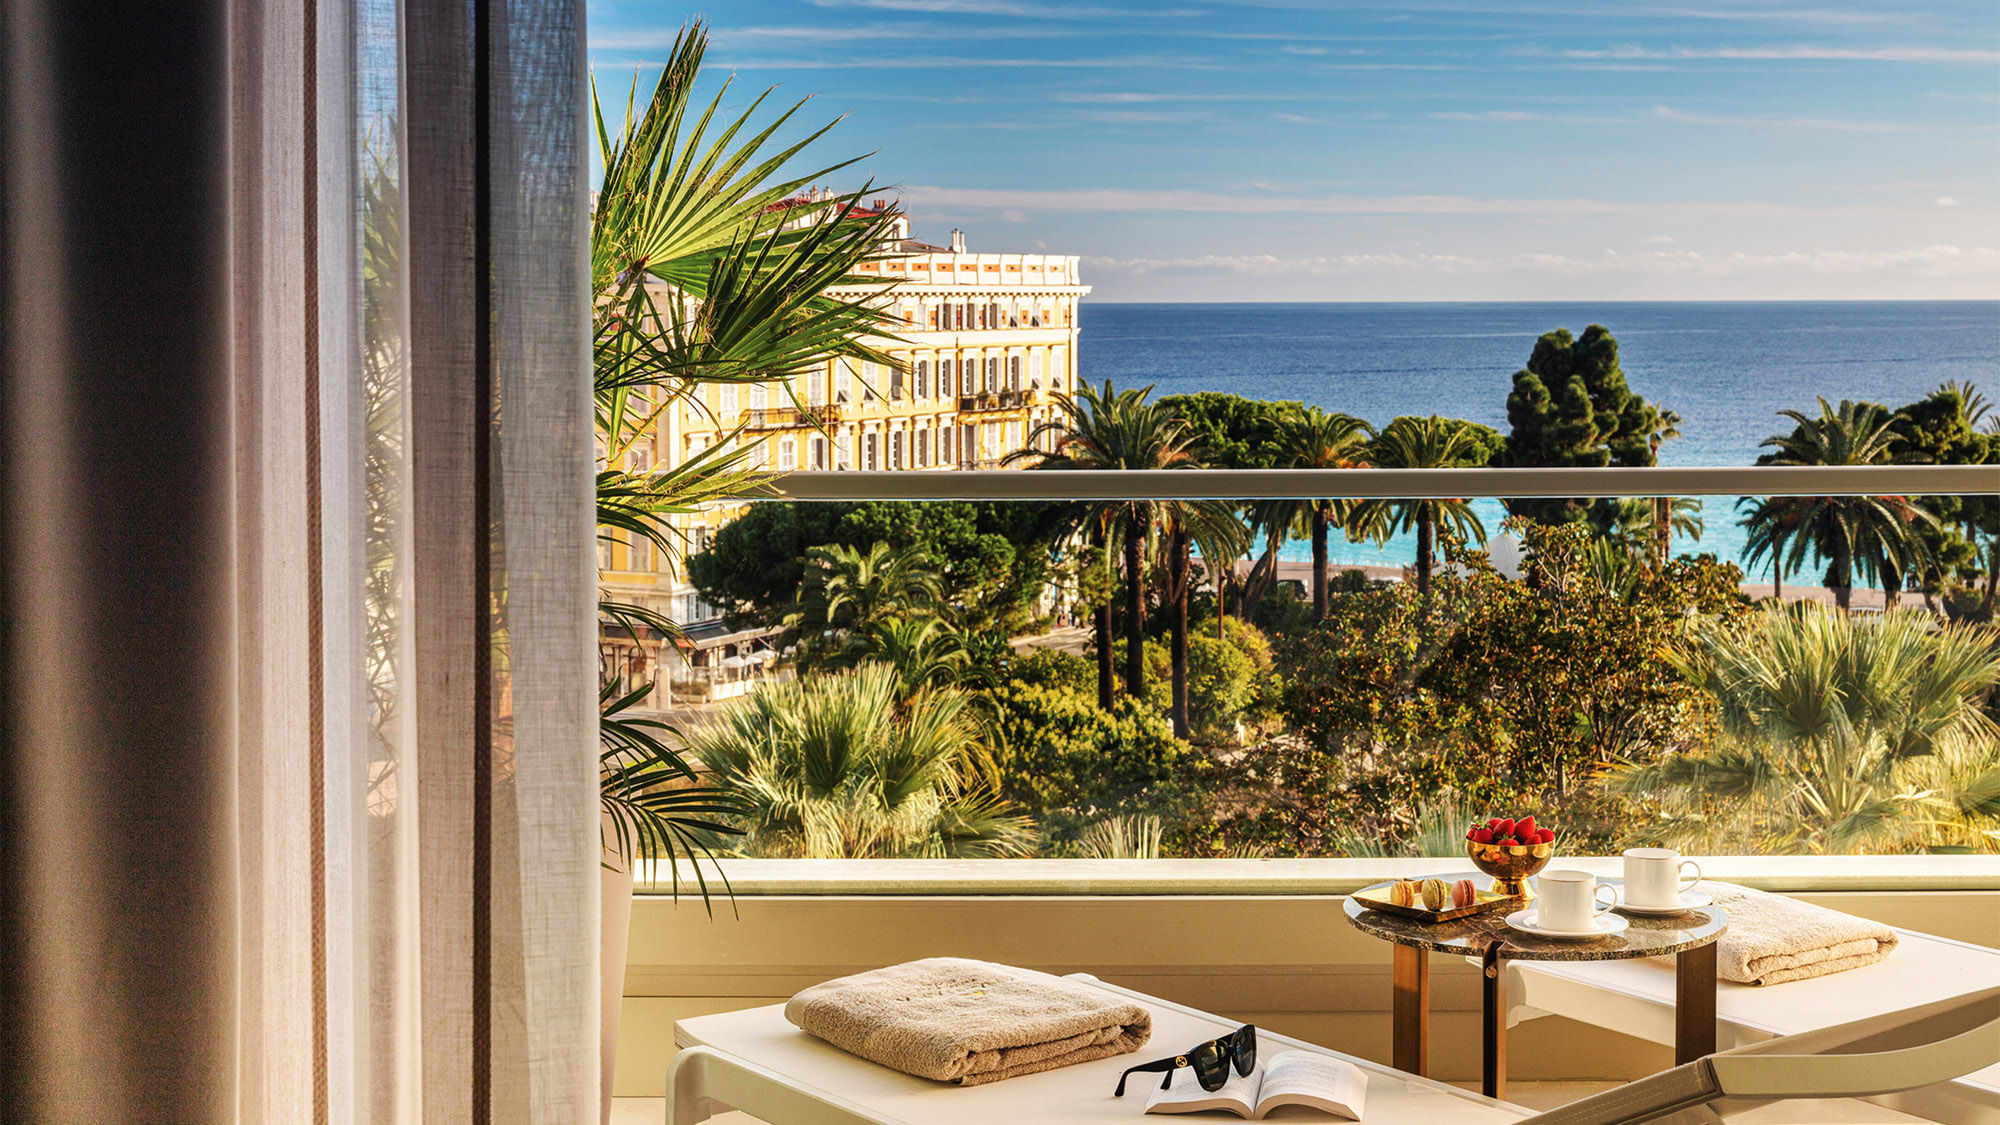 The view of the Mediterranean from a guestroom at the Anantara Plaza Nice Hotel.